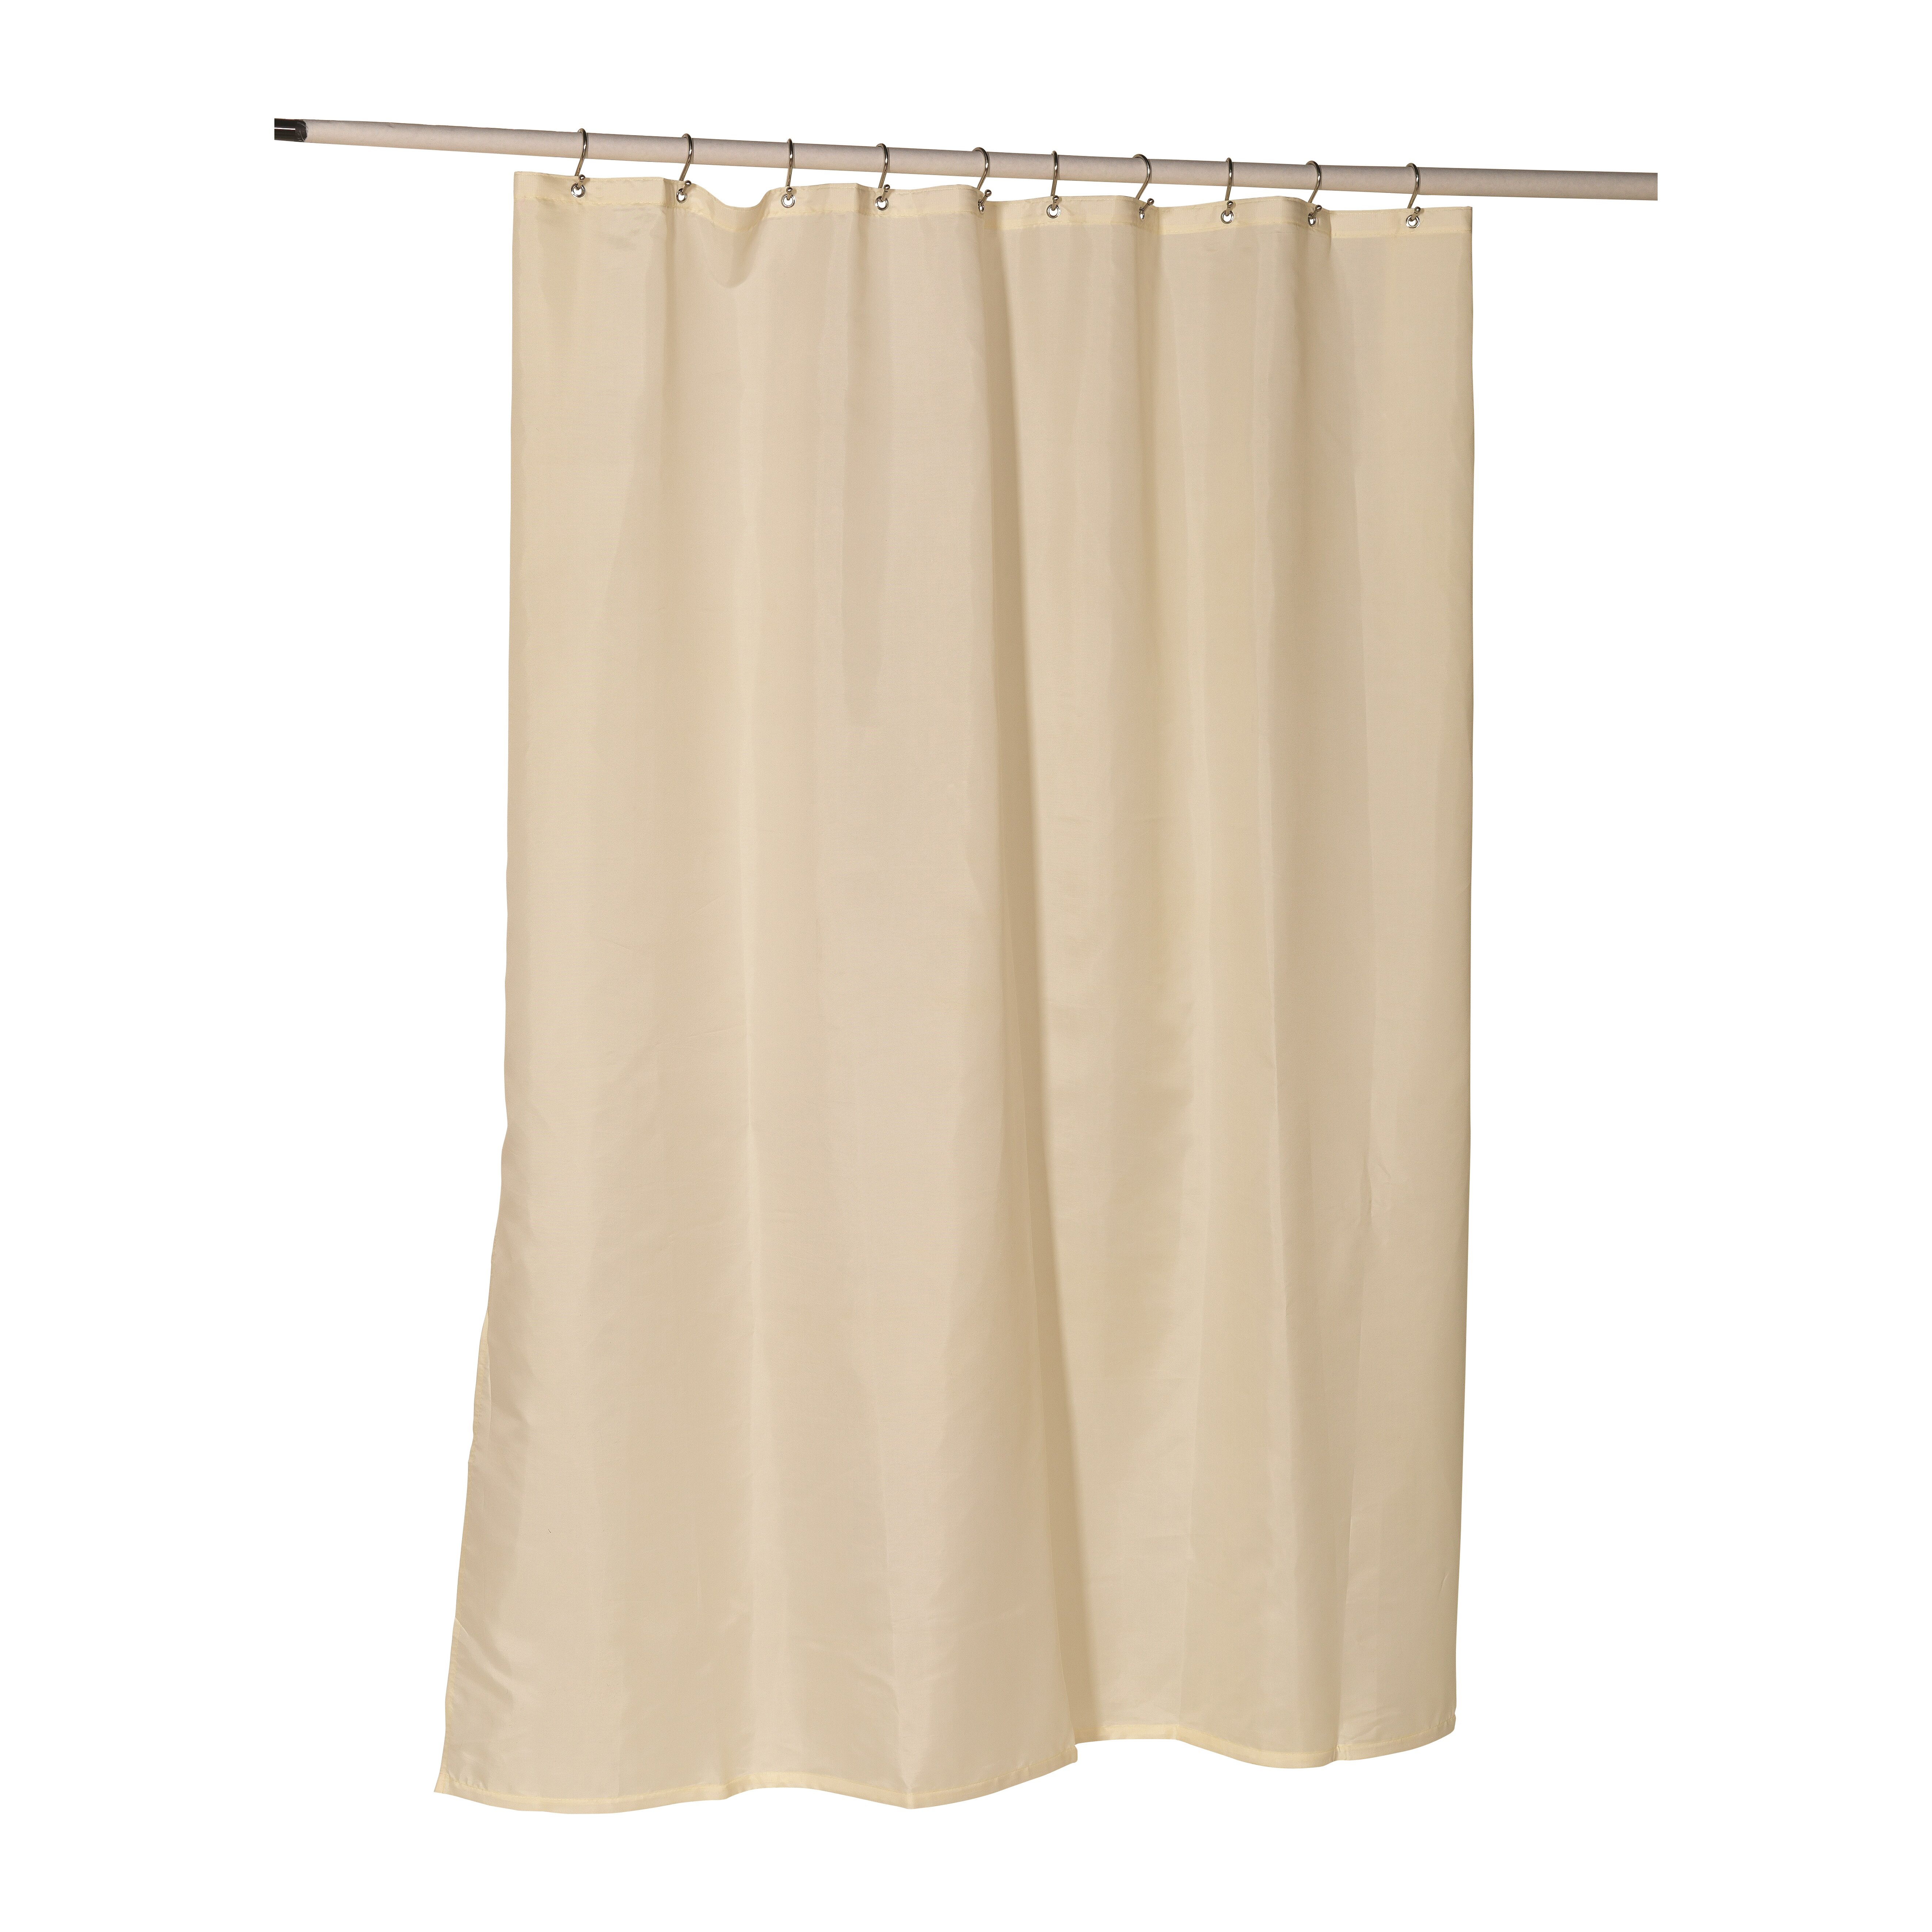 Nylon Shower Curtain Liners 82